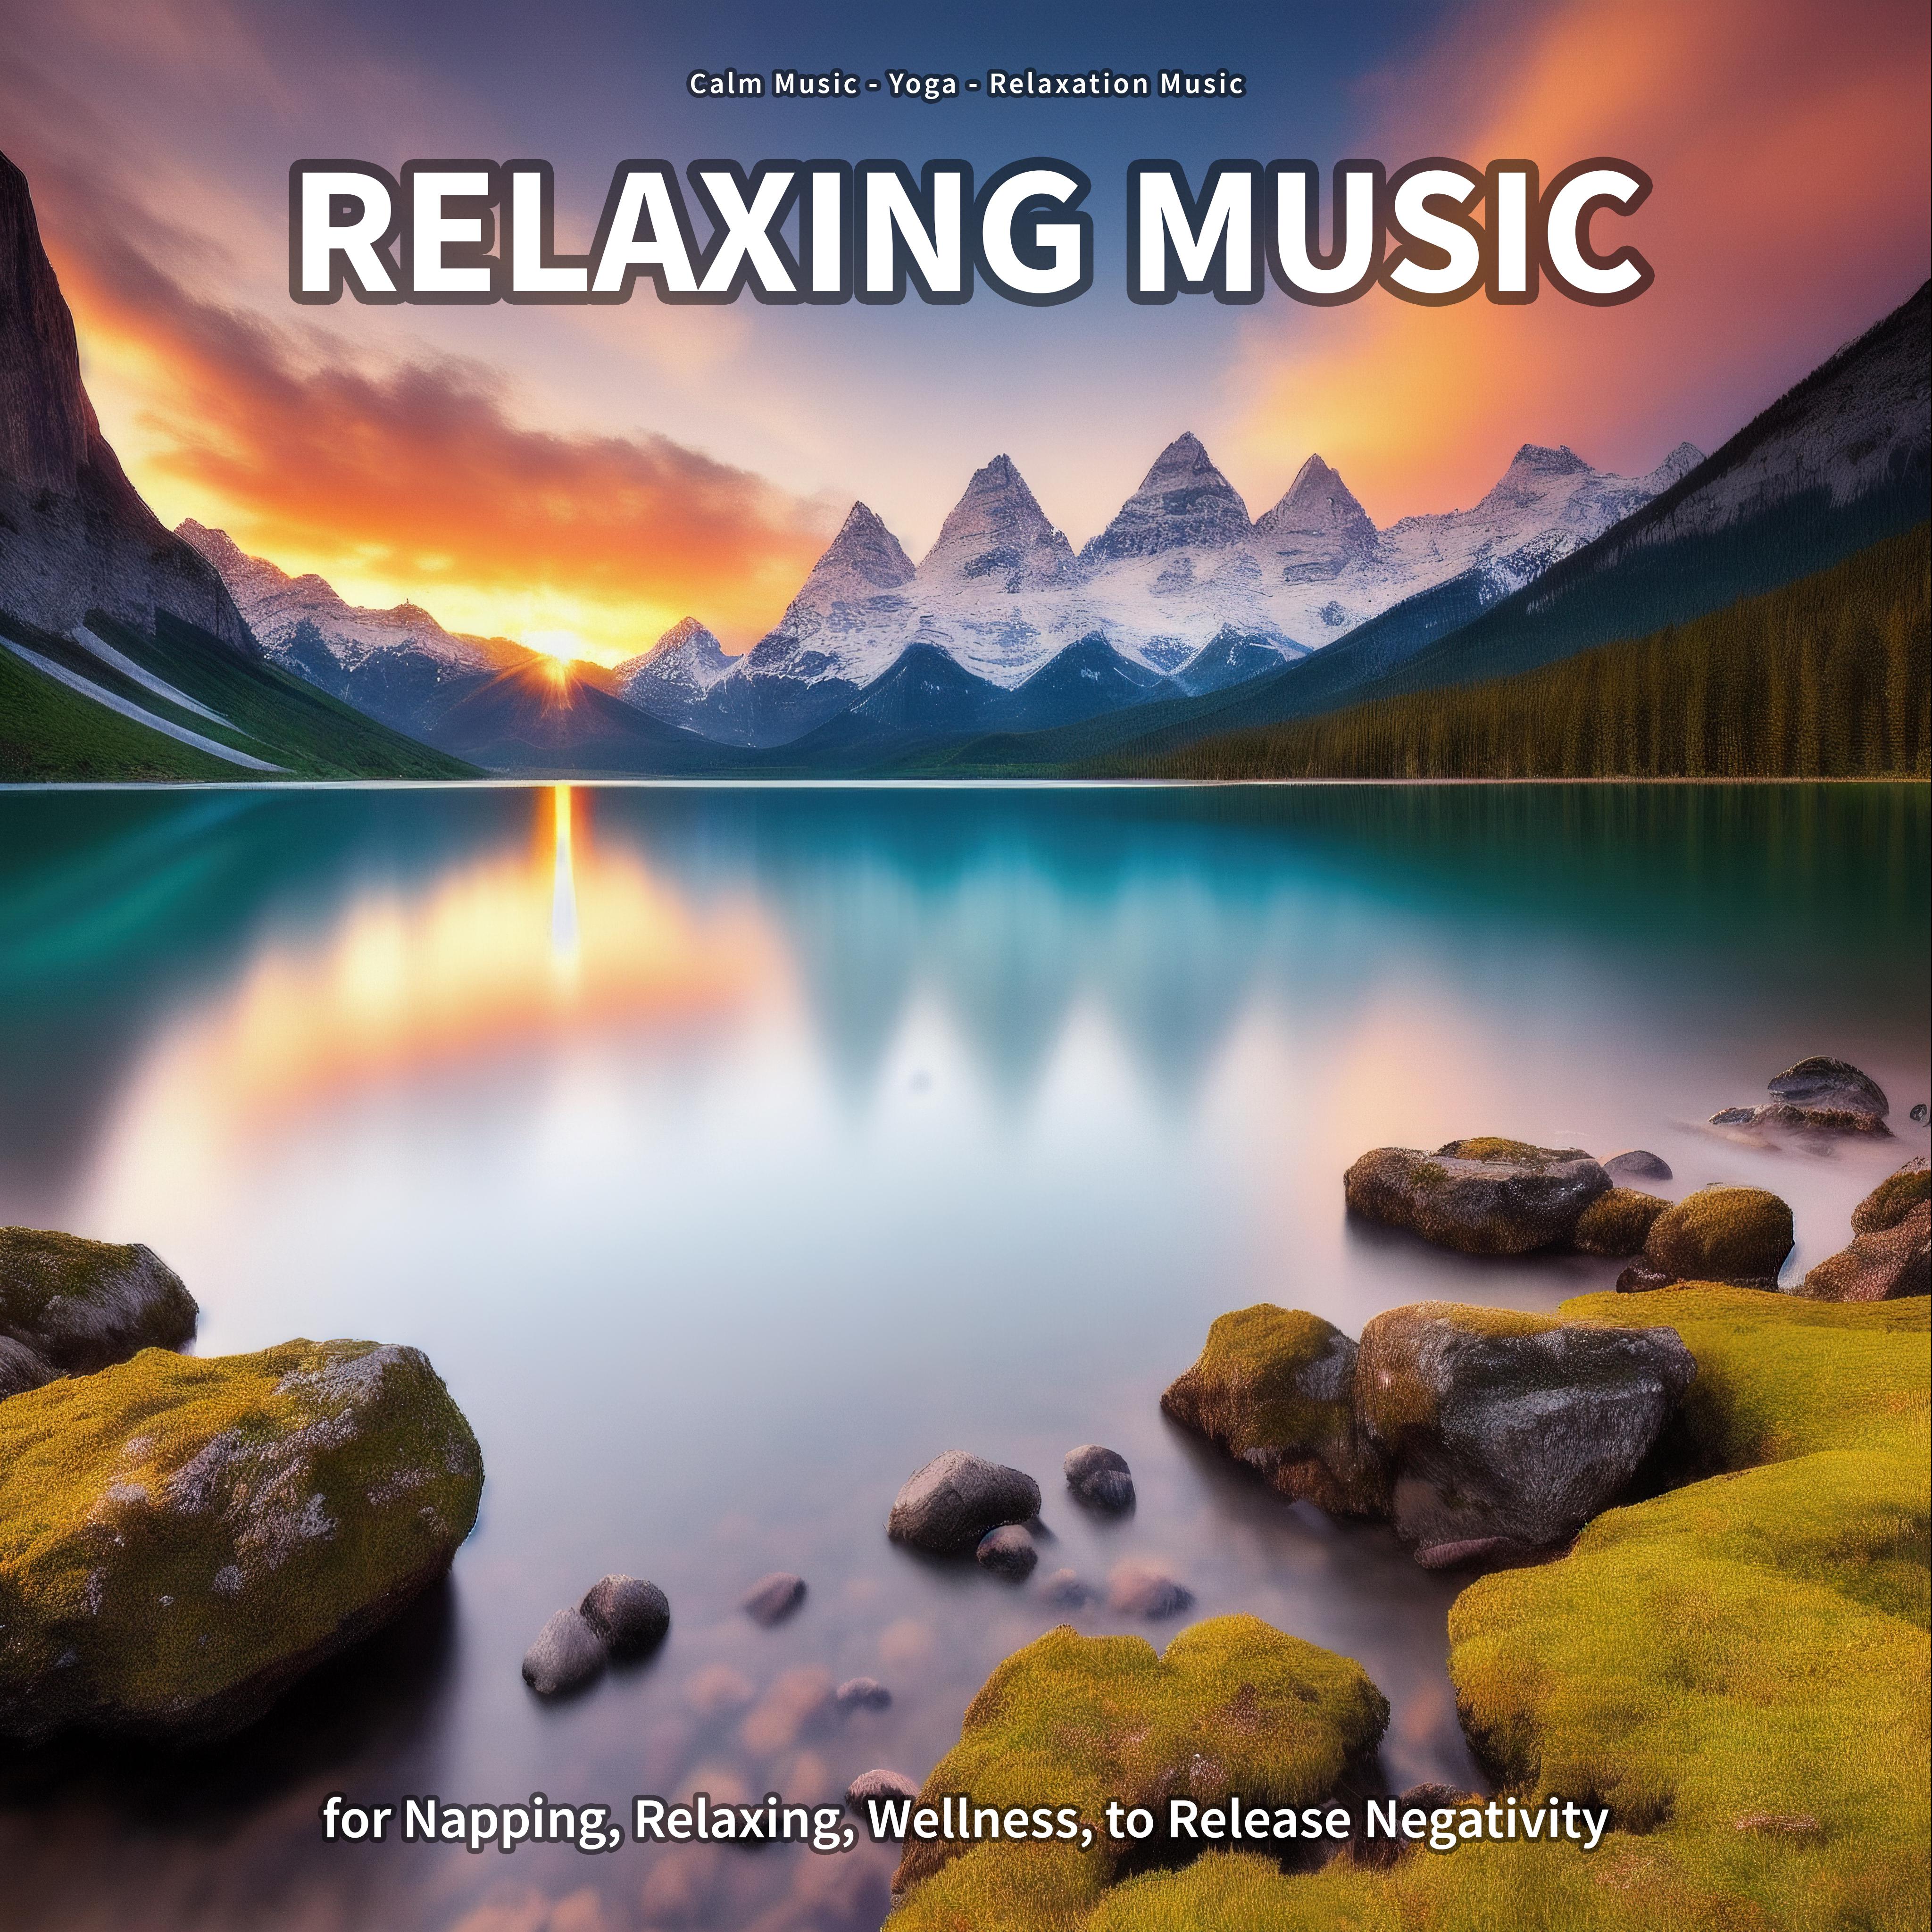 Calm Music - Relaxation Music